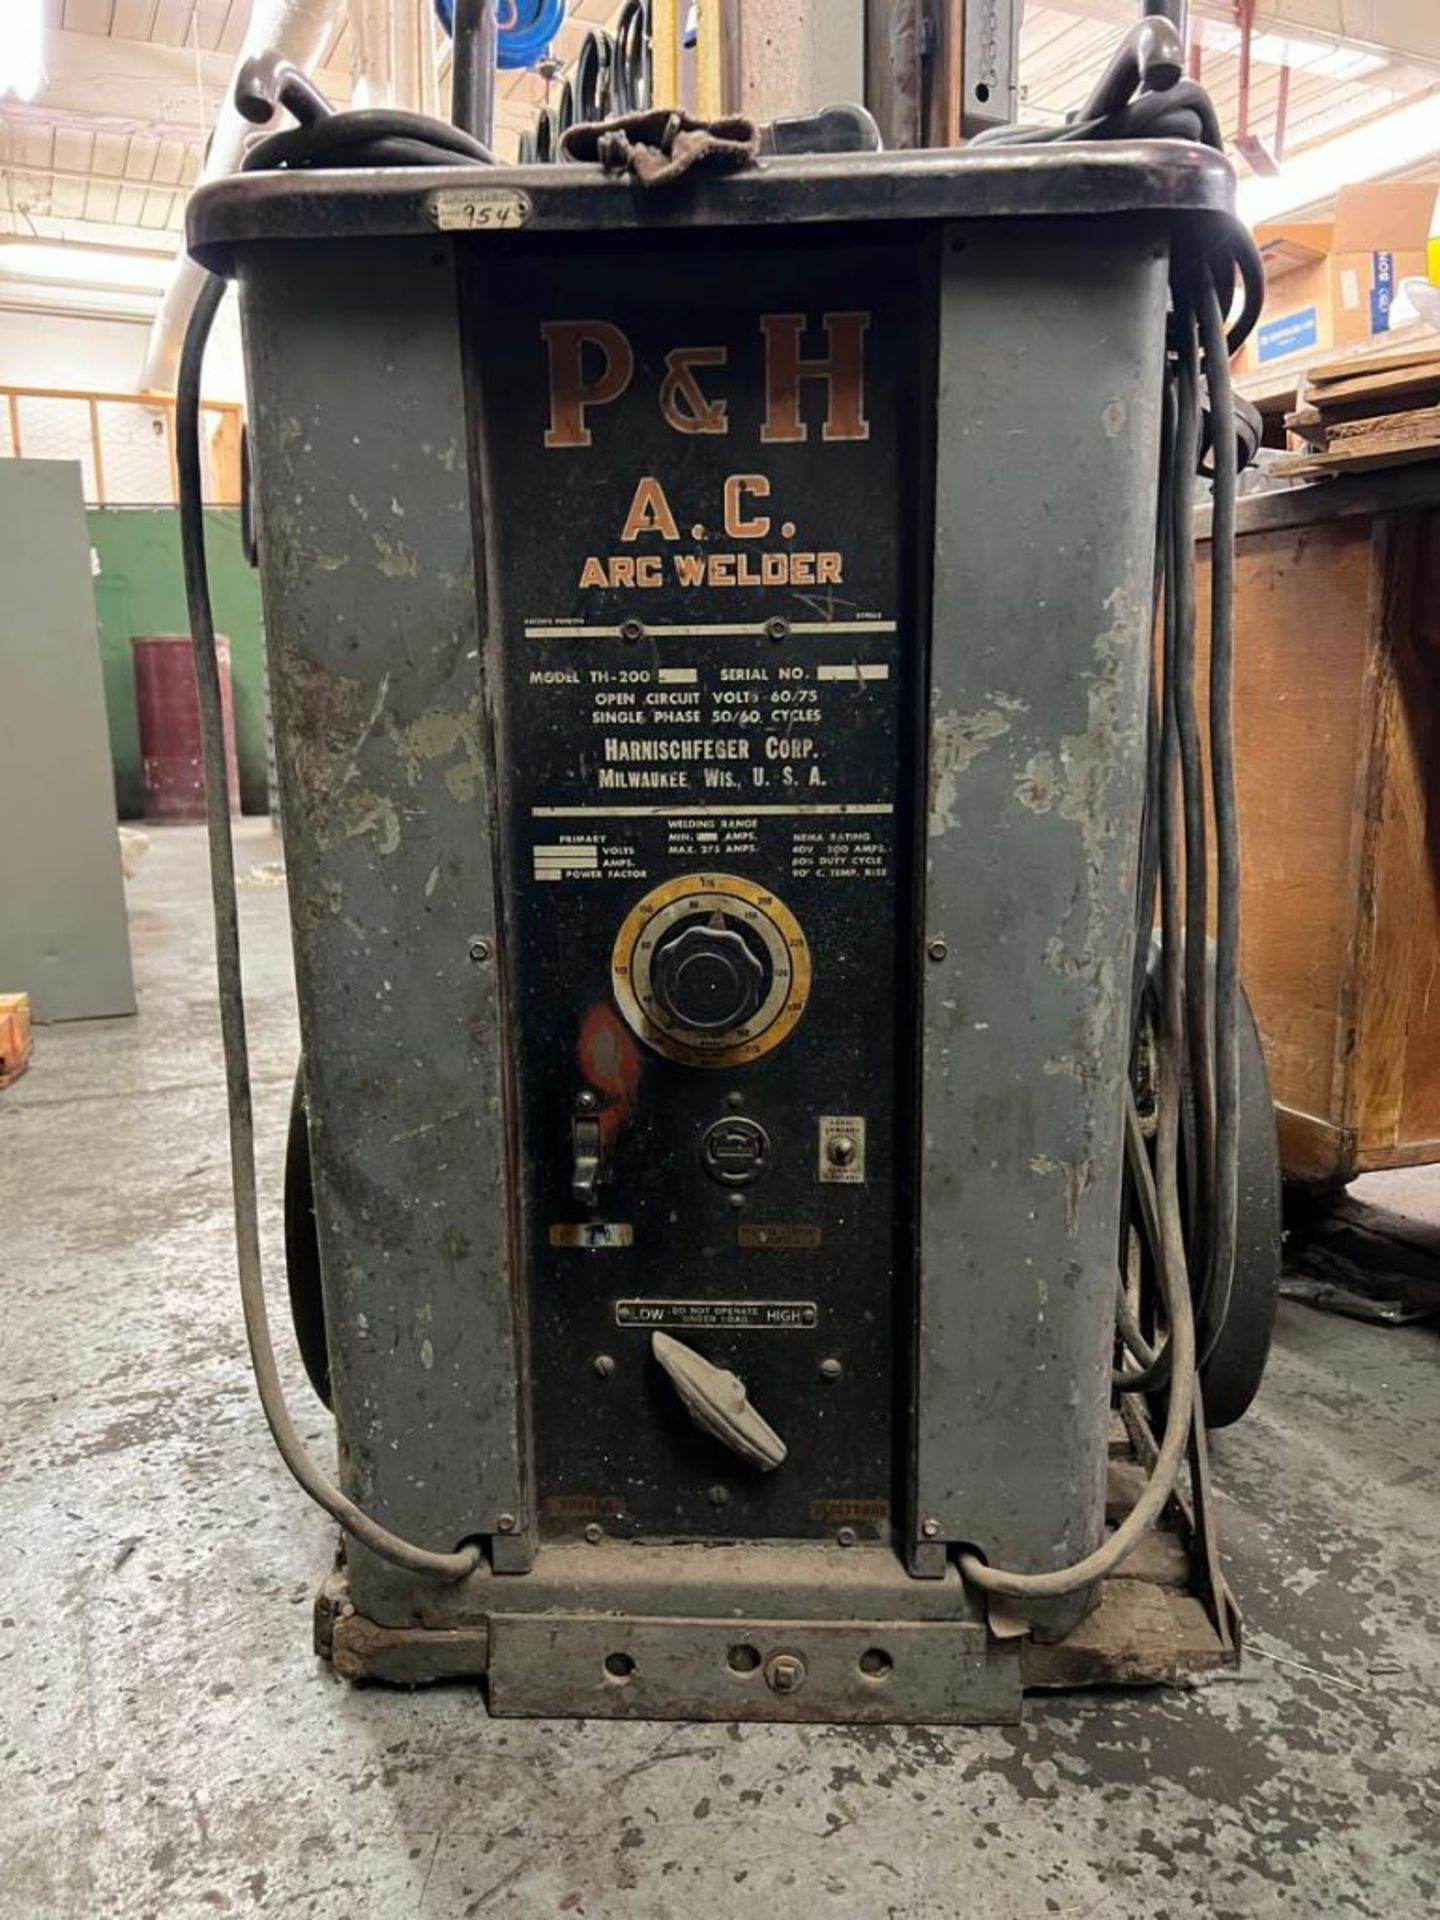 P&H Mdl: TH-200 AC/ Arc welder open circuit 60/75 V, single phase, 50/60 Cycle, Nema rating 40V, 200 - Image 4 of 6